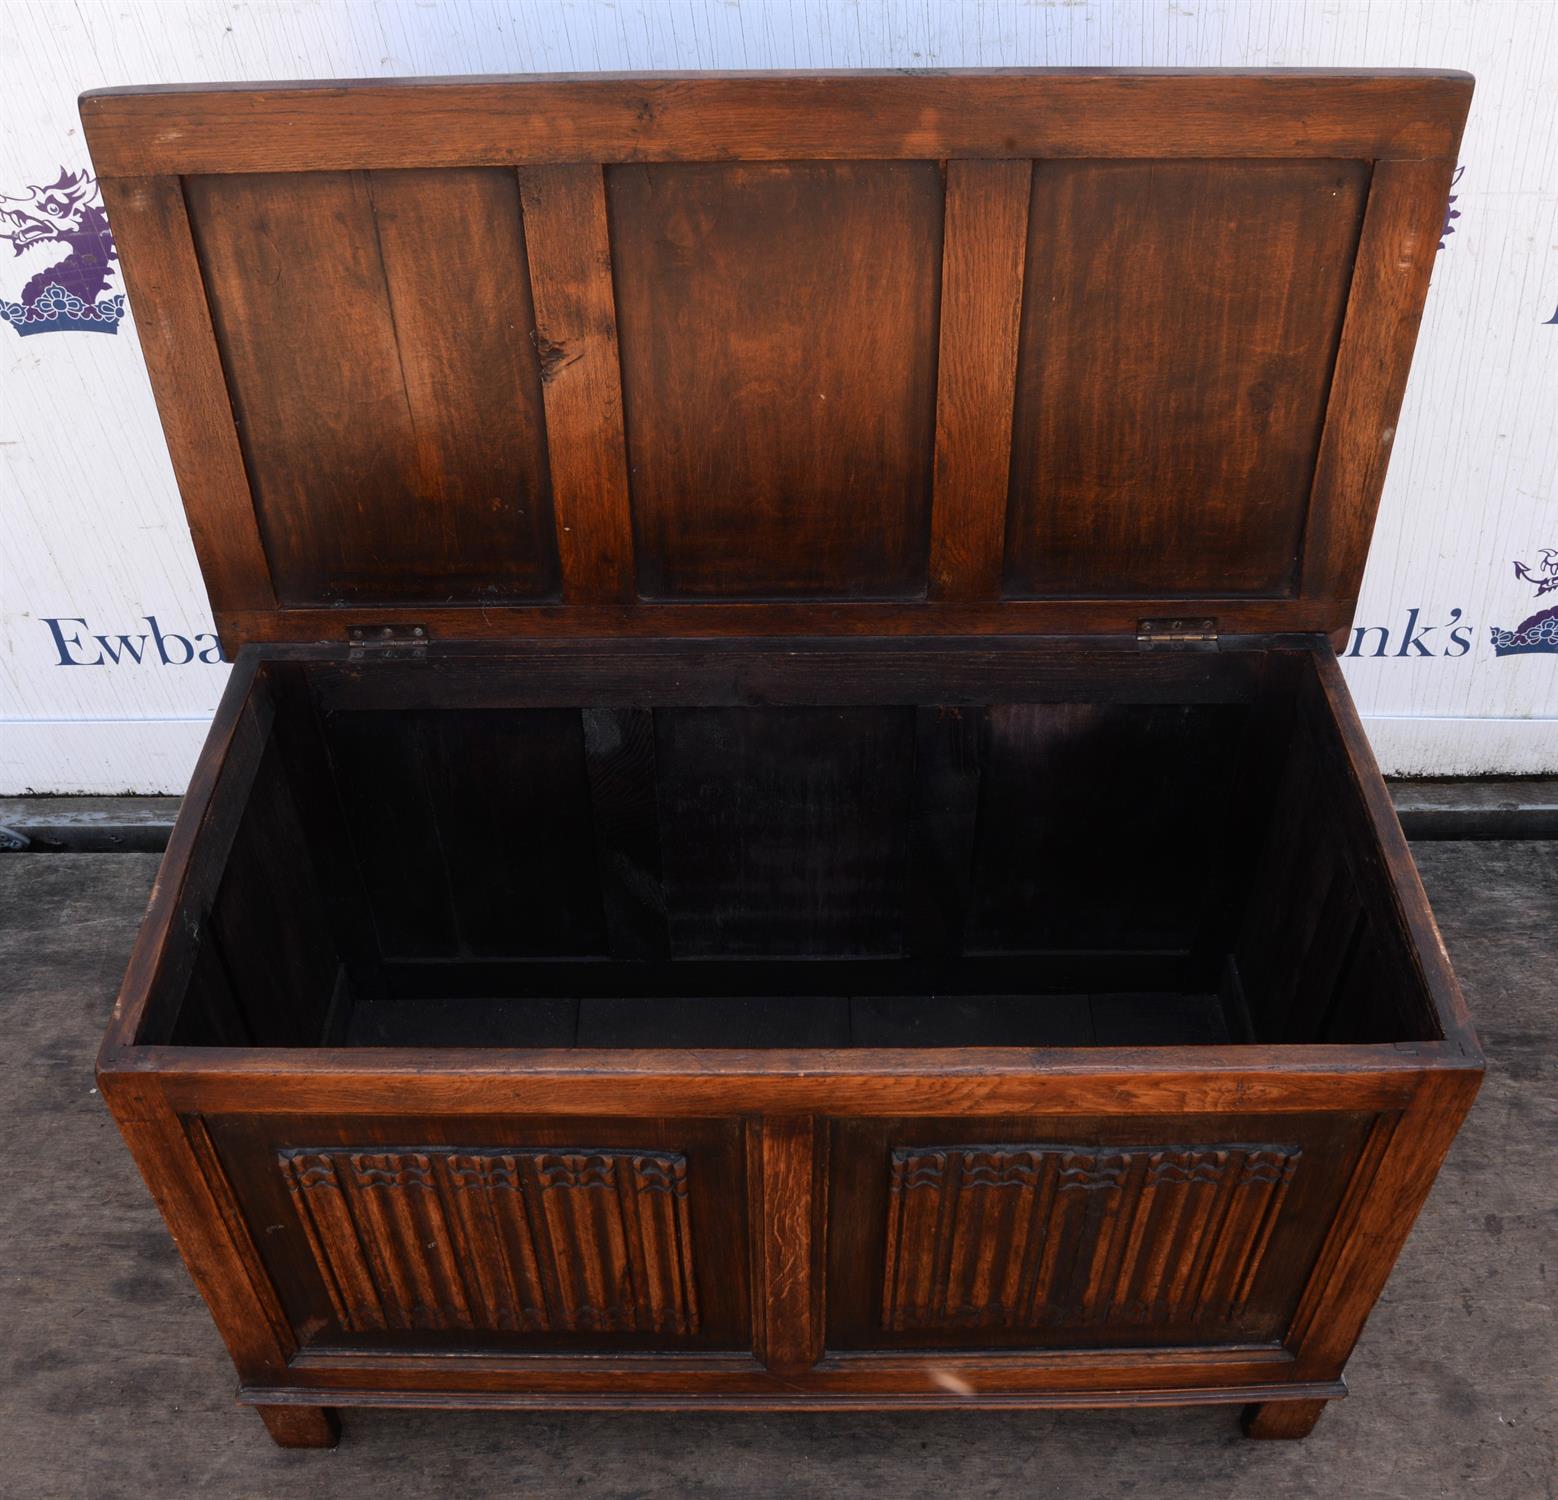 An Elizabethan style oak coffer, 1920s/30s, the front with a pair of linen fold panels, H 56cm, - Image 4 of 4